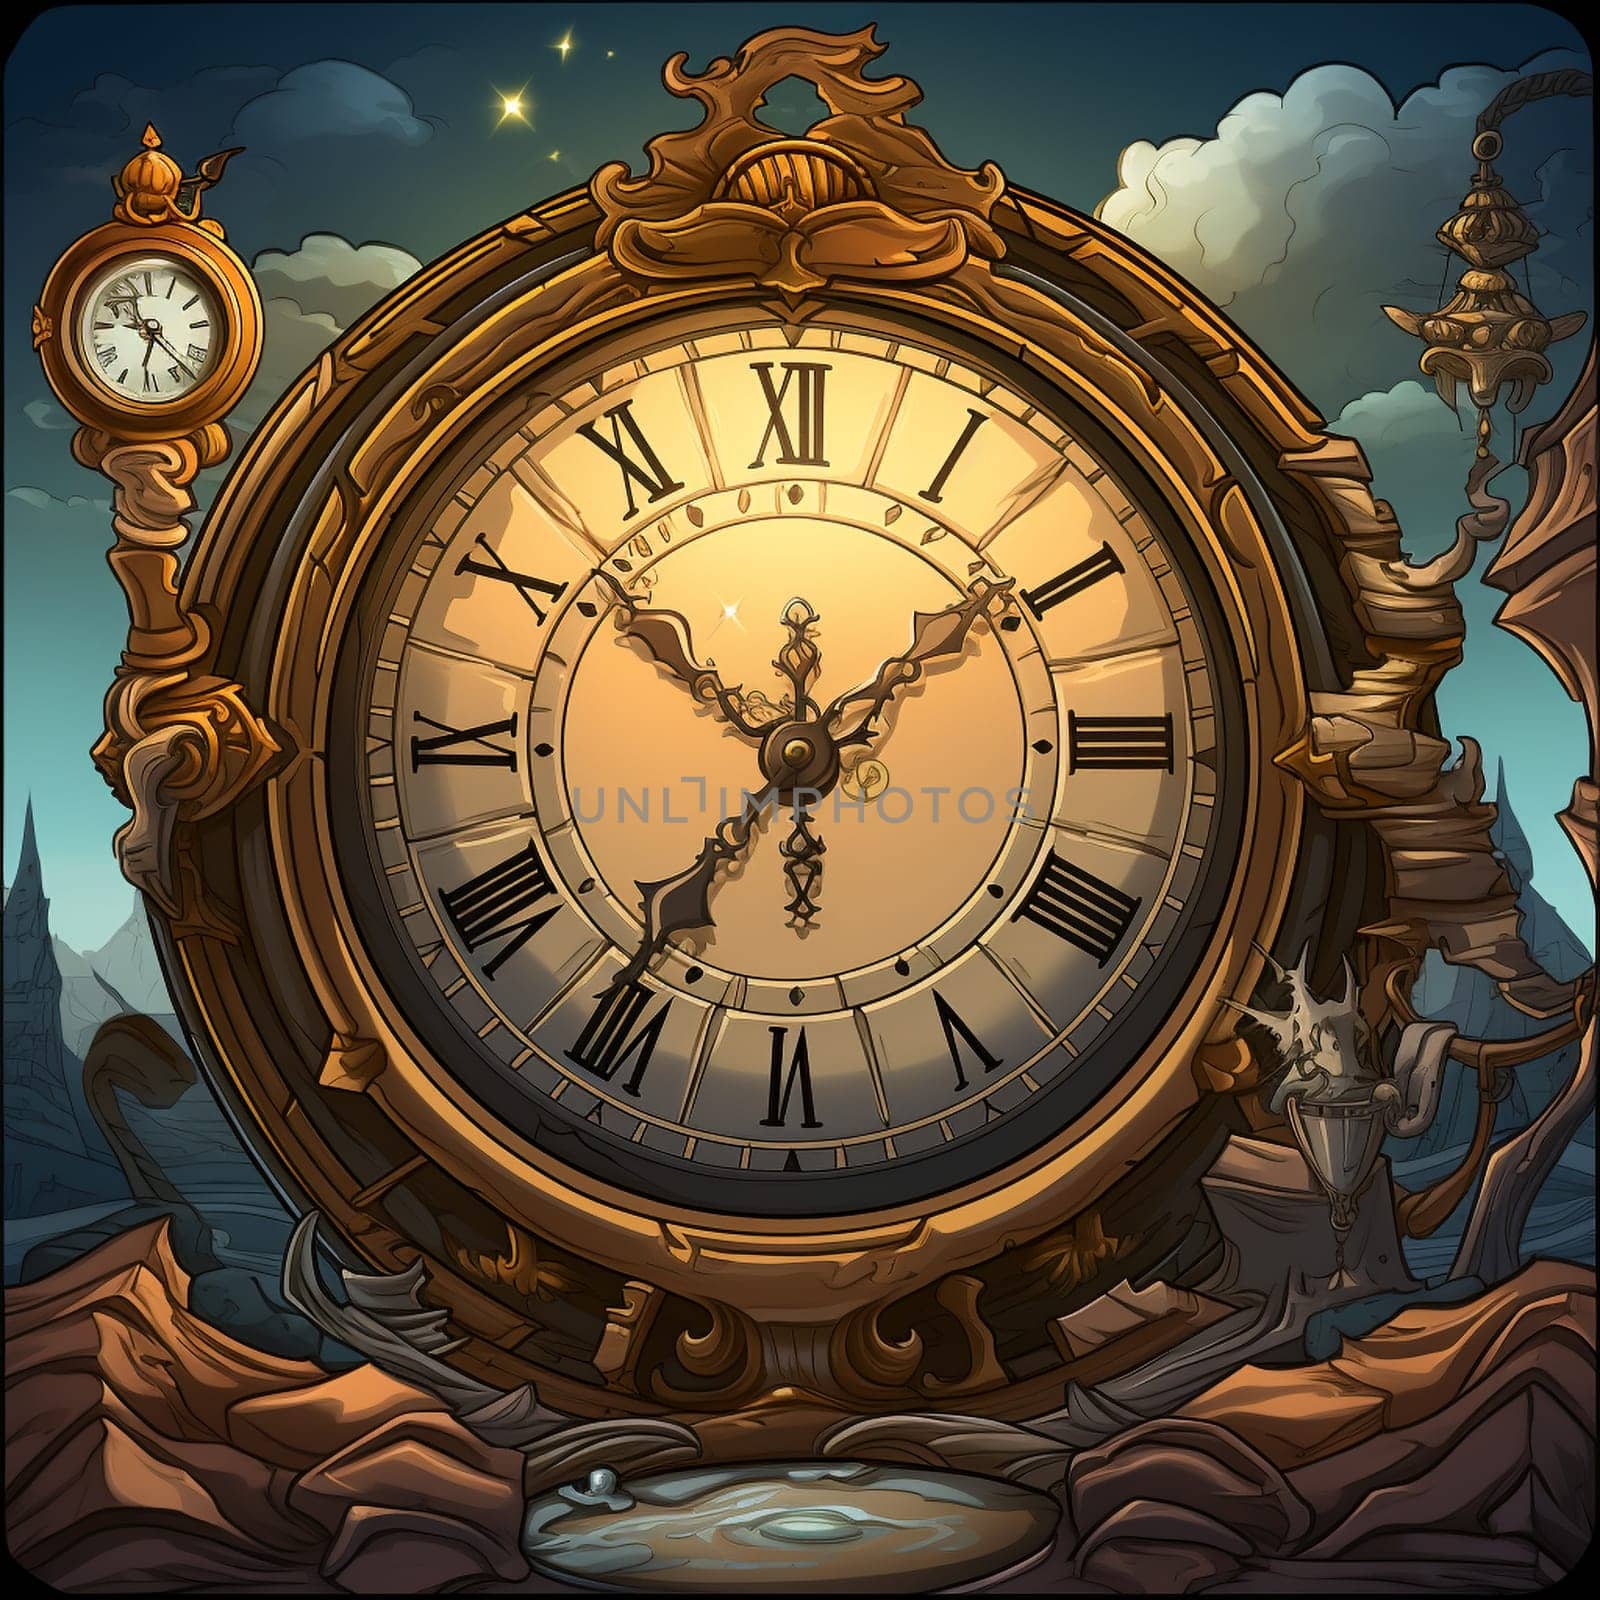 Step into a magical world where vintage clocks come to life in this whimsical illustration. Each clock has its own unique personality and story to tell, from a clock tower detective solving mysterious cases, to a pocket watch exploring hidden realms, or a grandfather clock orchestrating a magical symphony. The scene is filled with delightful details like intricate clockwork mechanisms, aged patina, and a touch of fantasy. Let the Tick Tock Tales of Vintage Clocks unfold before your eyes!